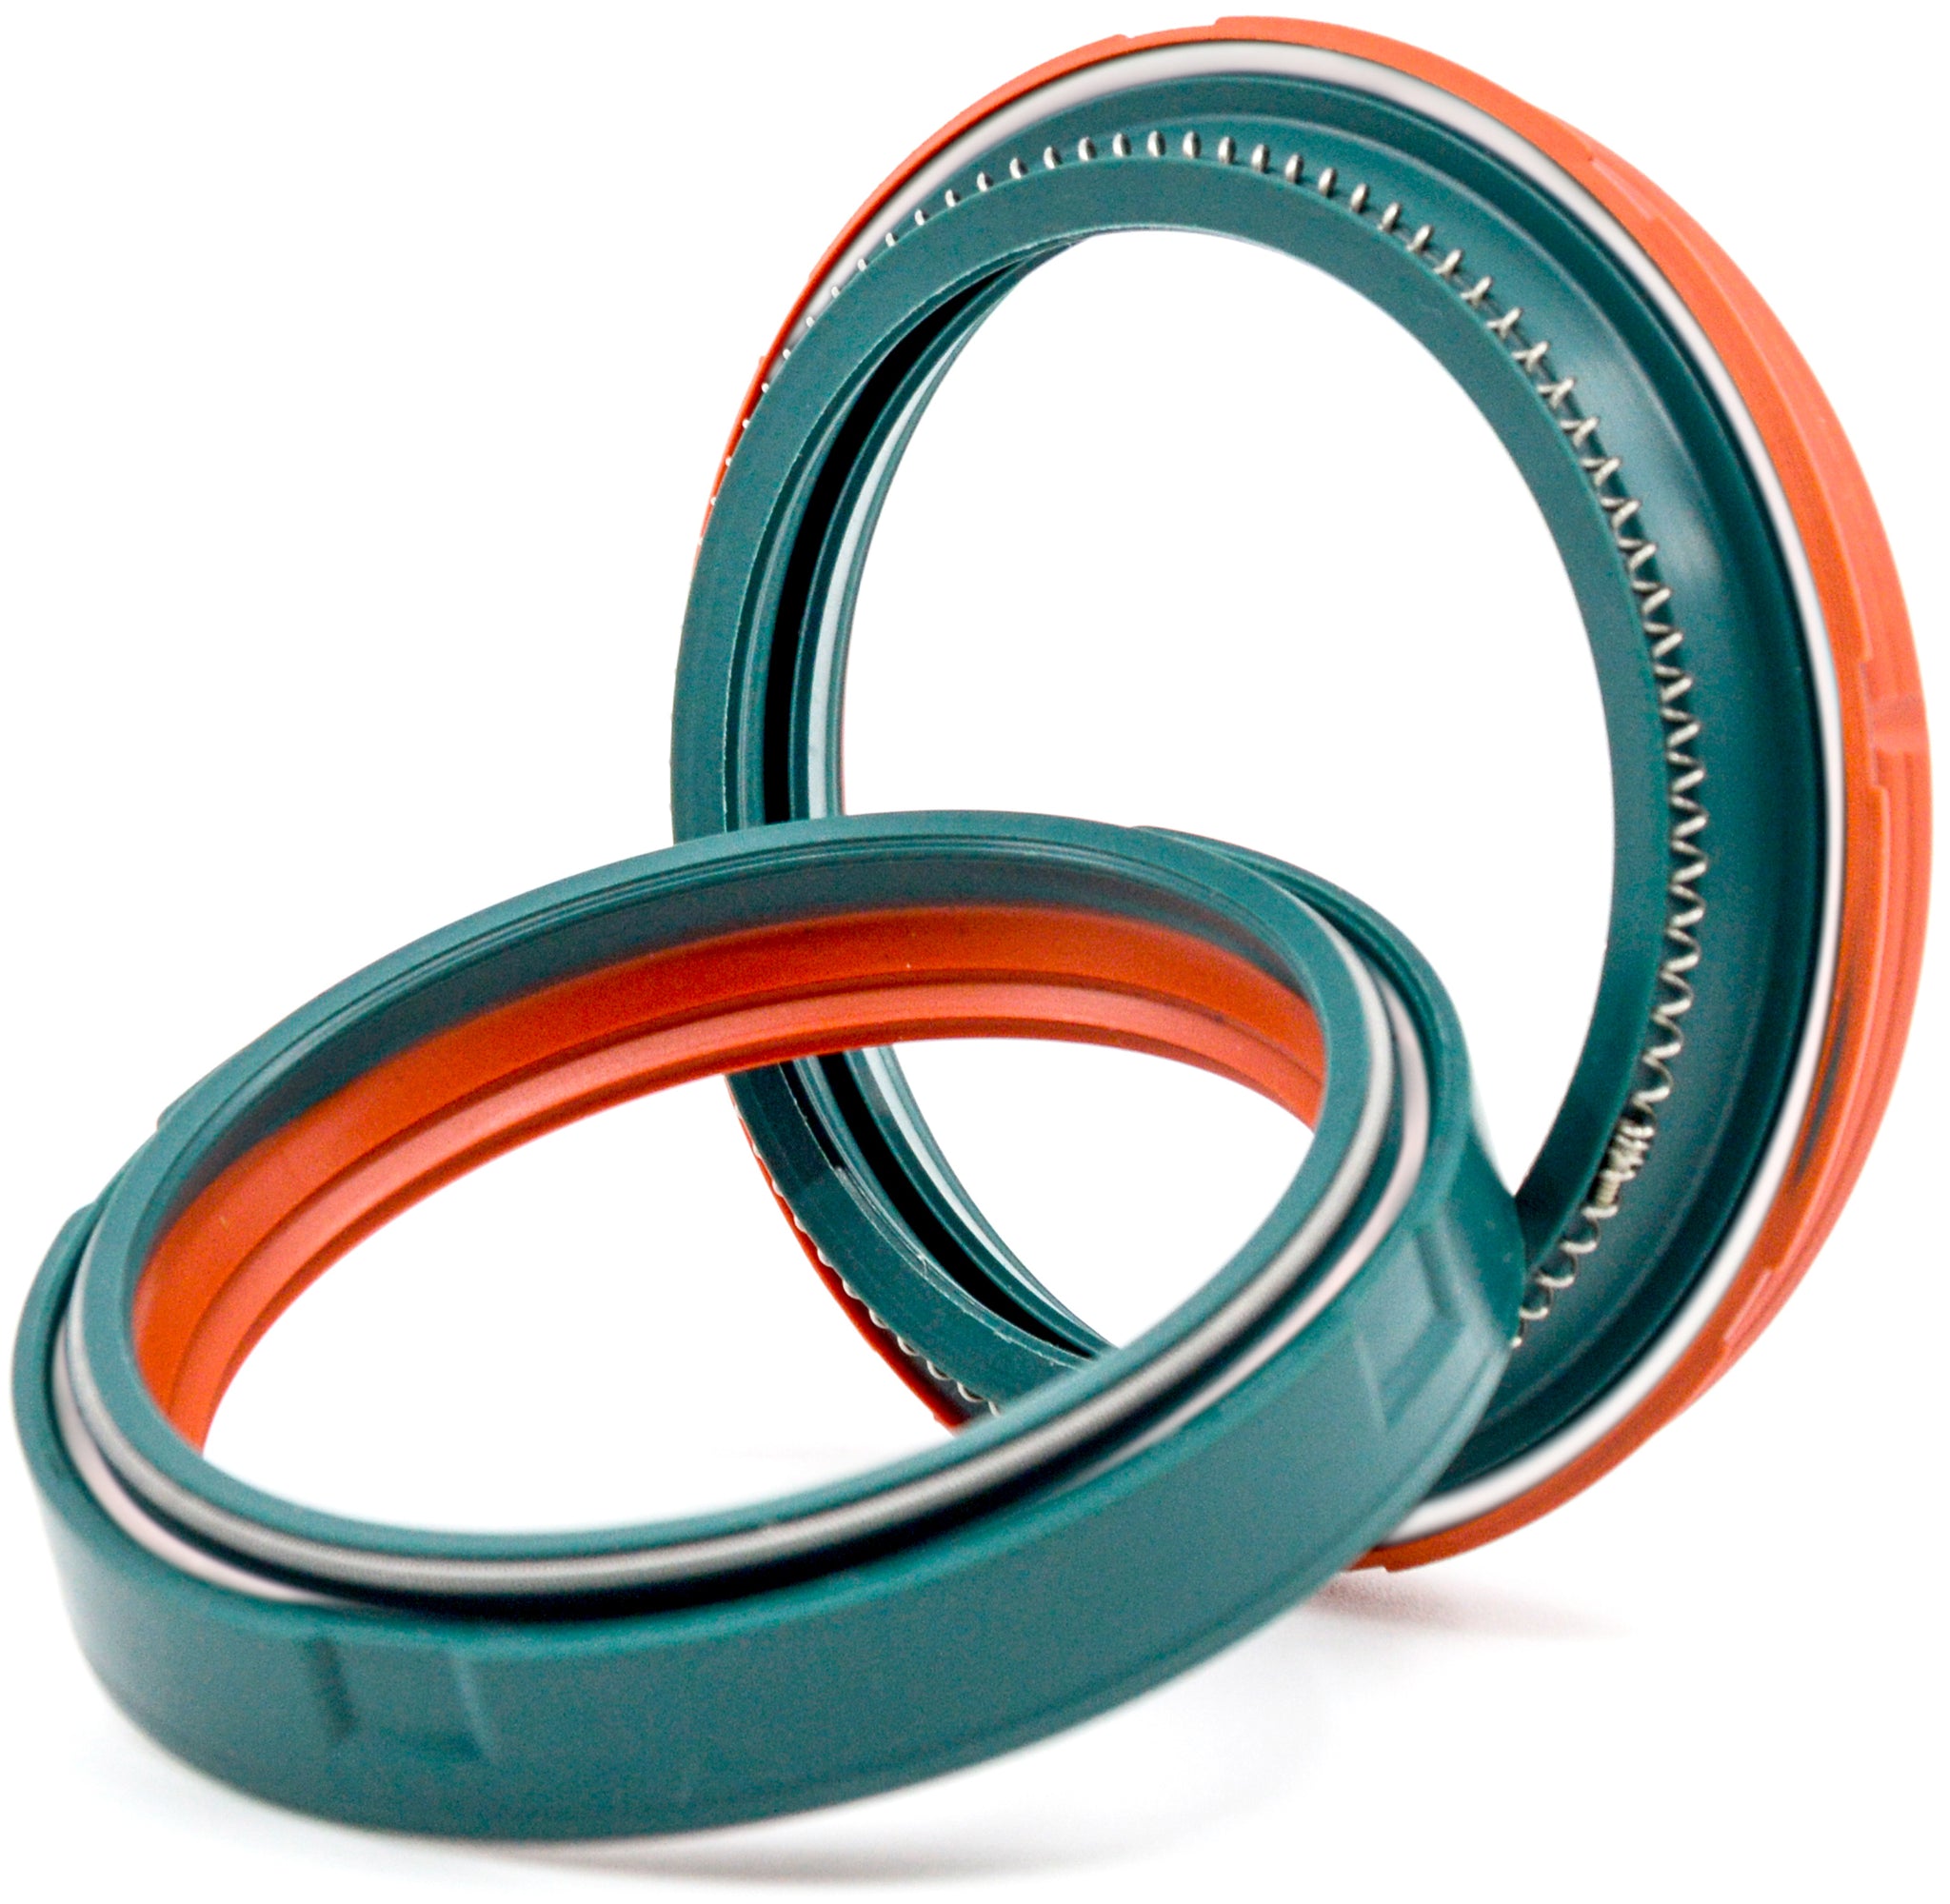 Dual Compound Fork Seal Kit Wp 43 Mm